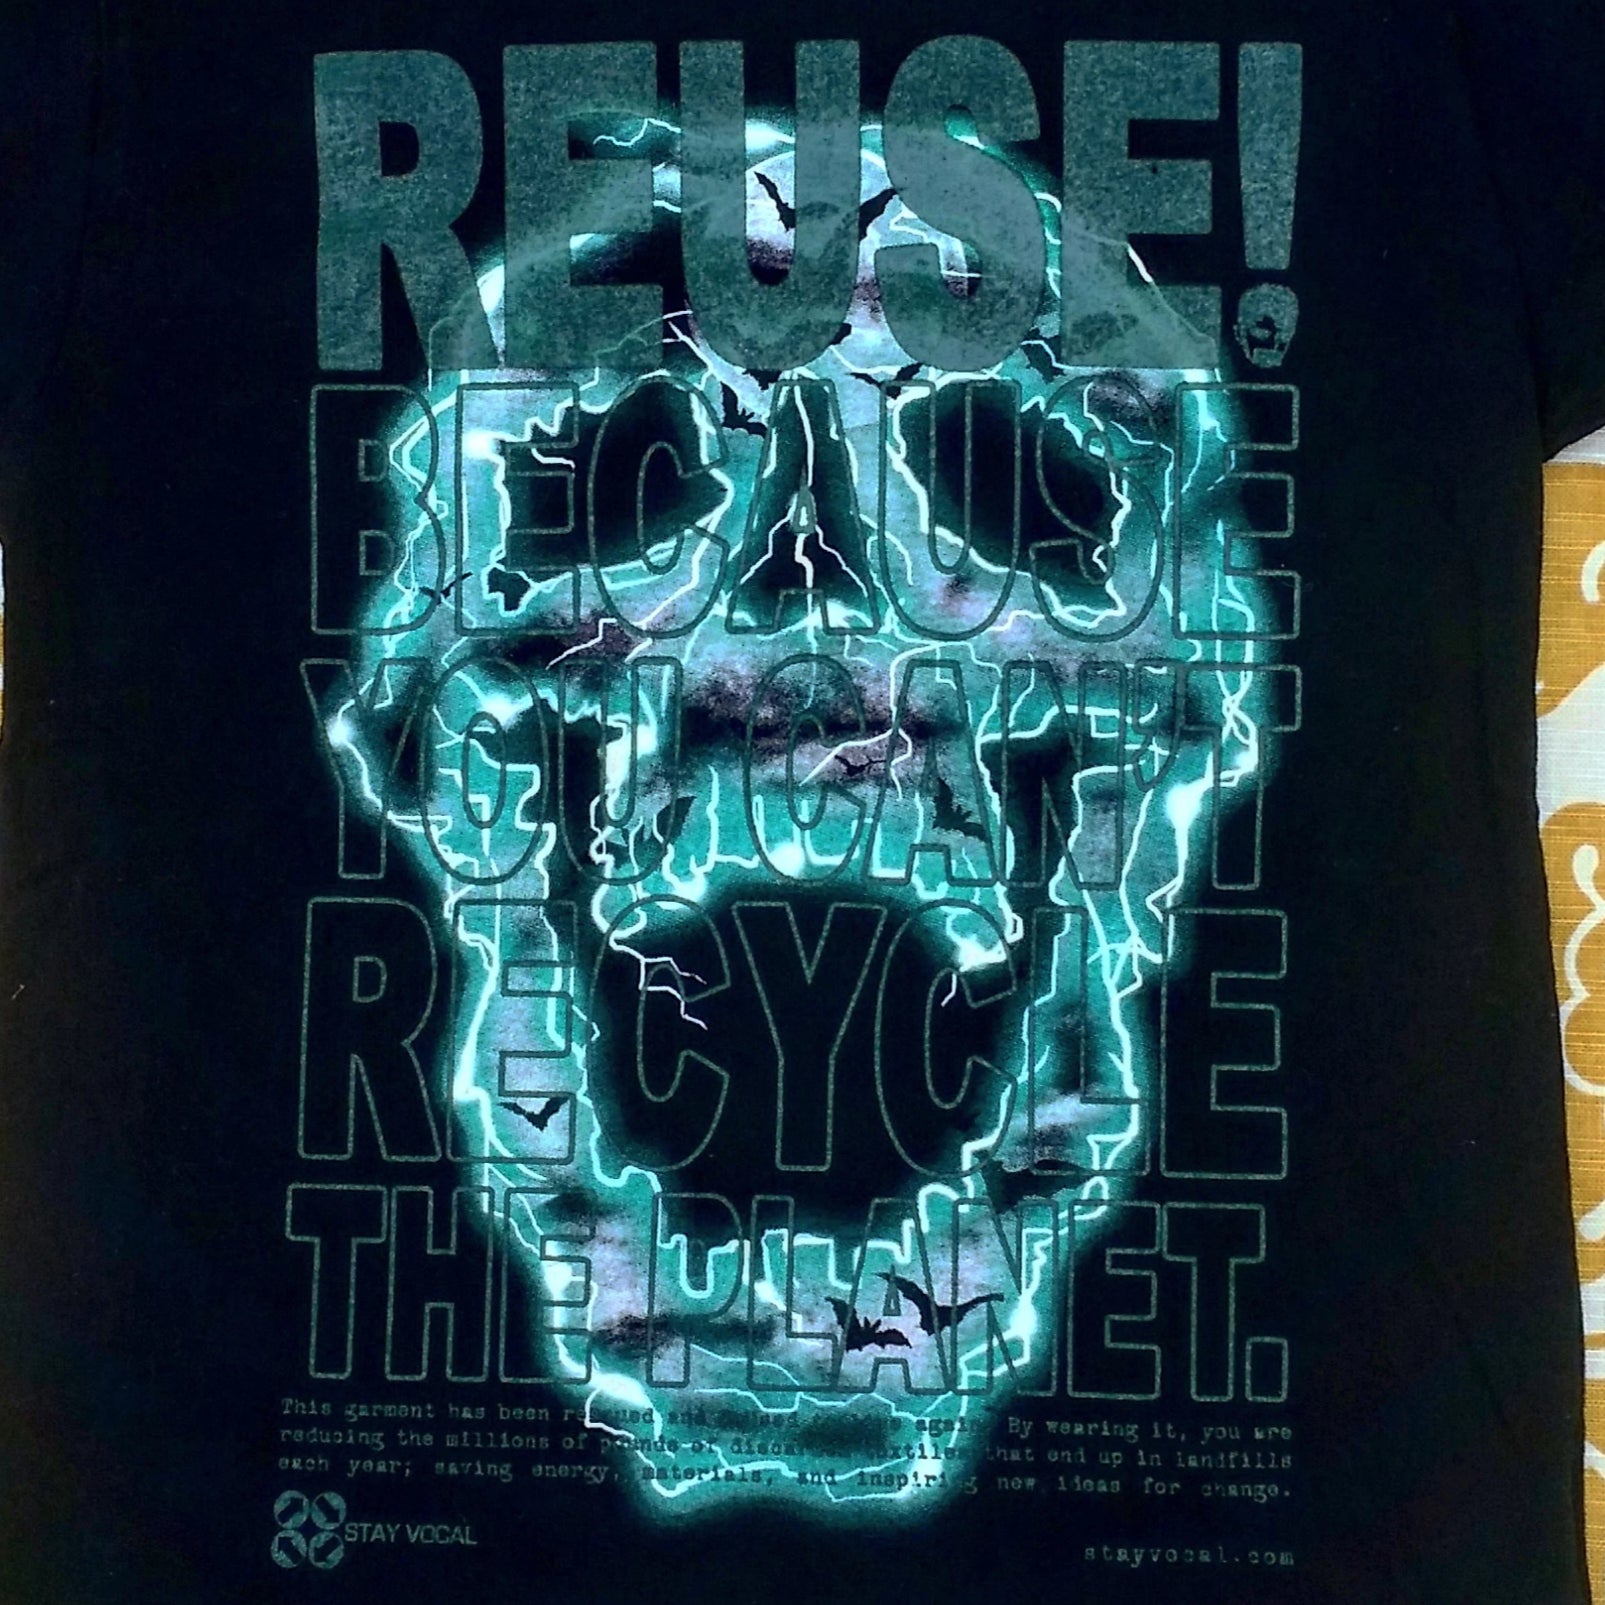 One of a Kind (Kid's L) REUSE! Glowing Skull T-Shirt